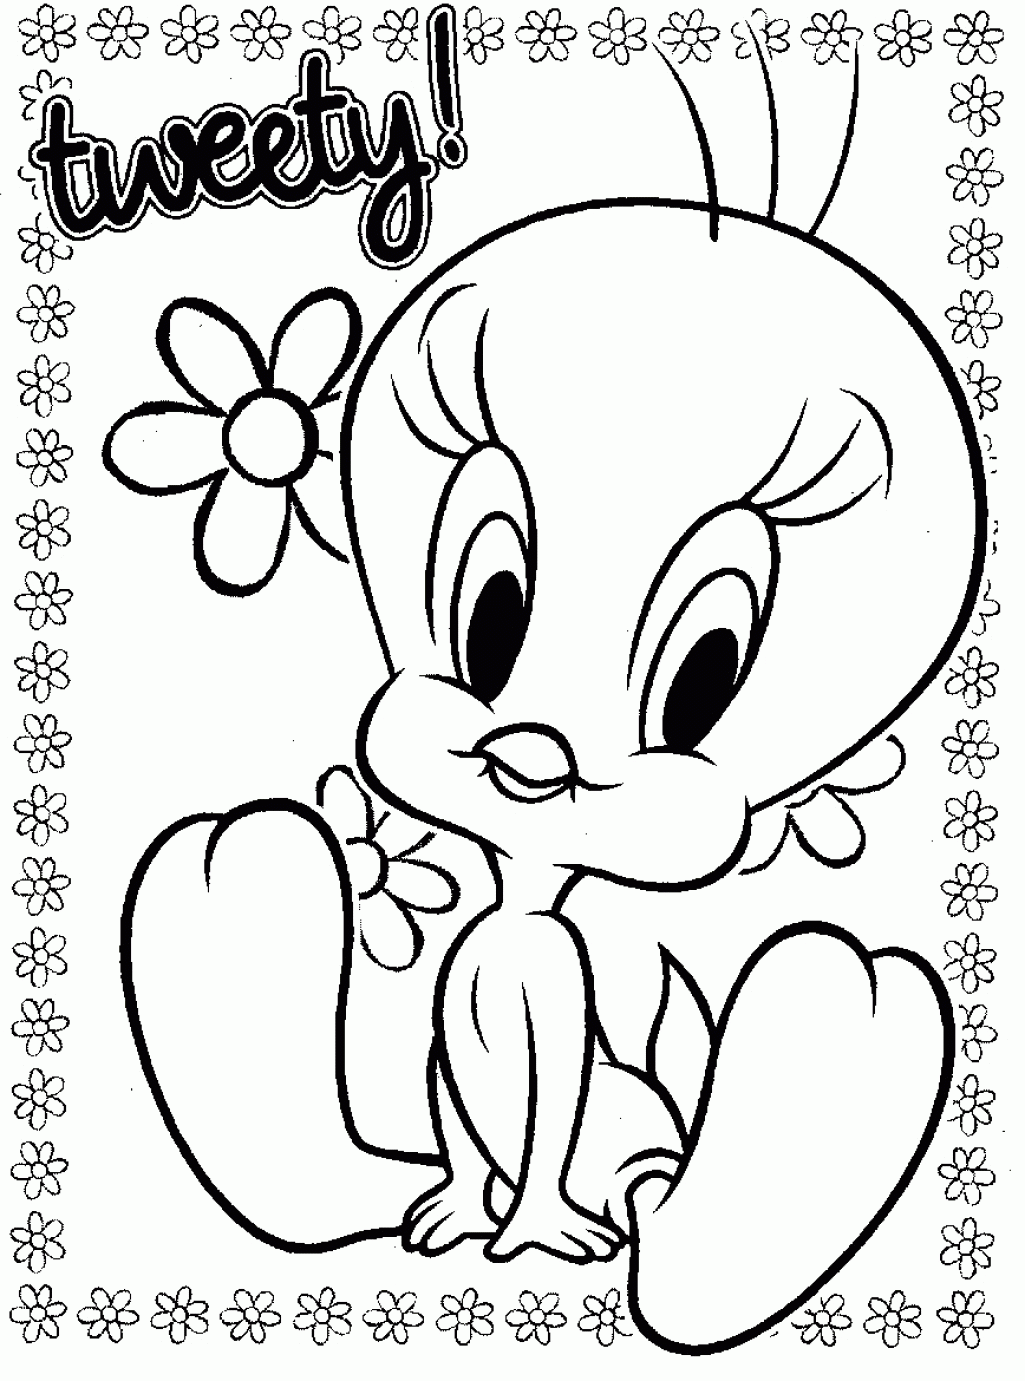 Free Printable Coloring Pages For Girls - Coloring pages